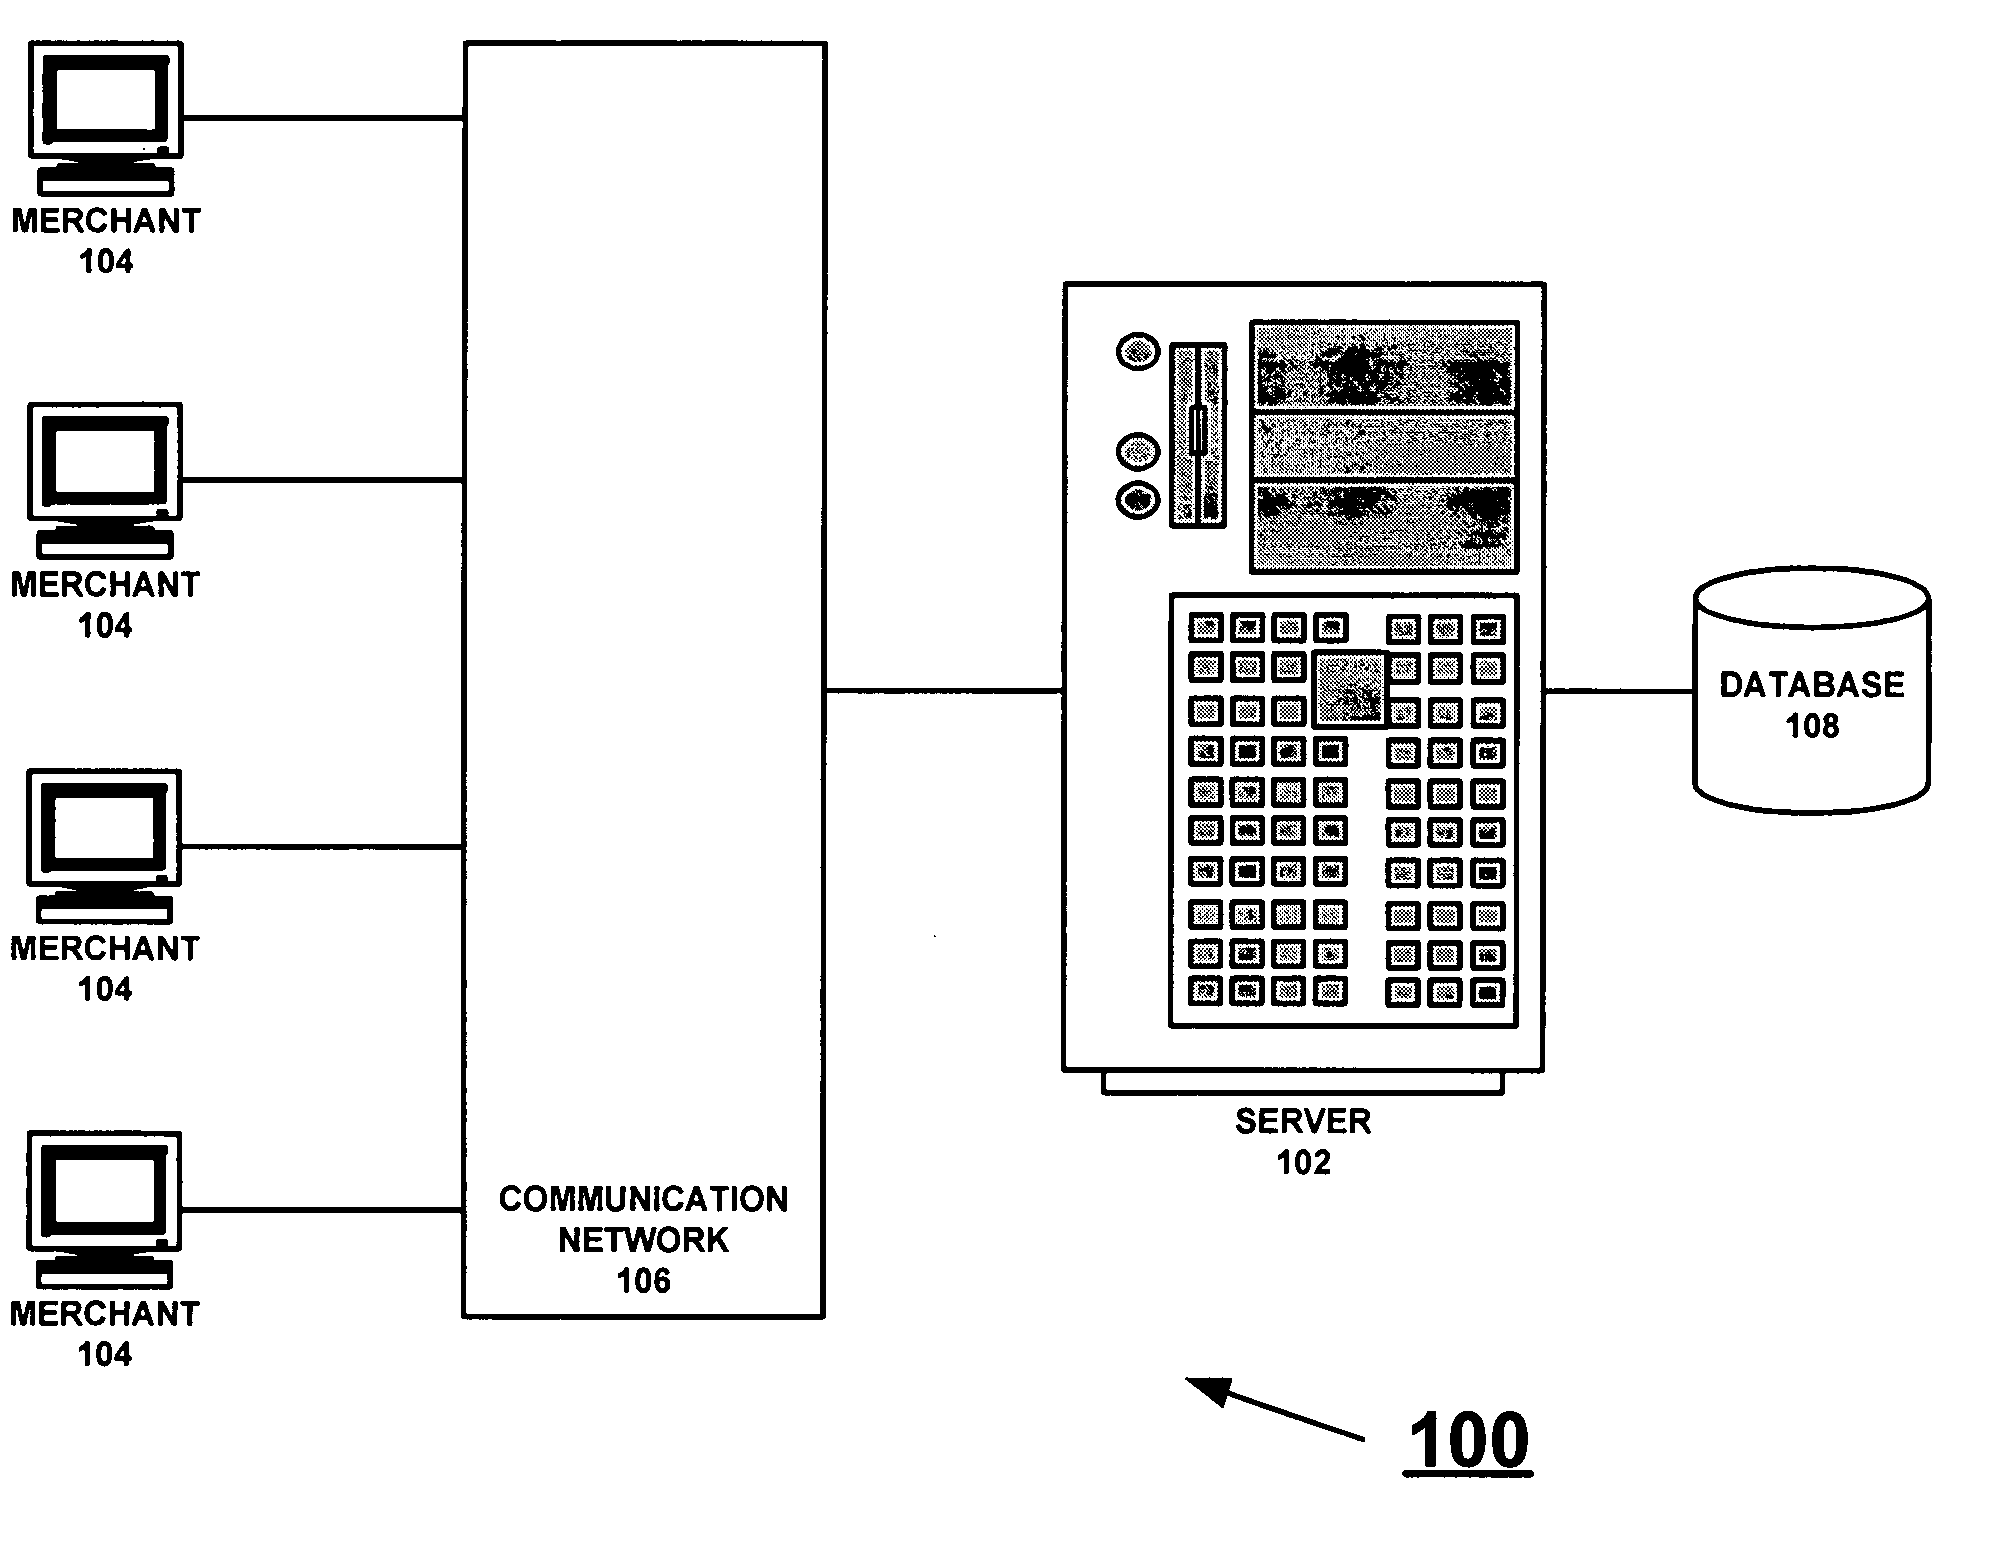 System and method for performing automated testing of a merchant message